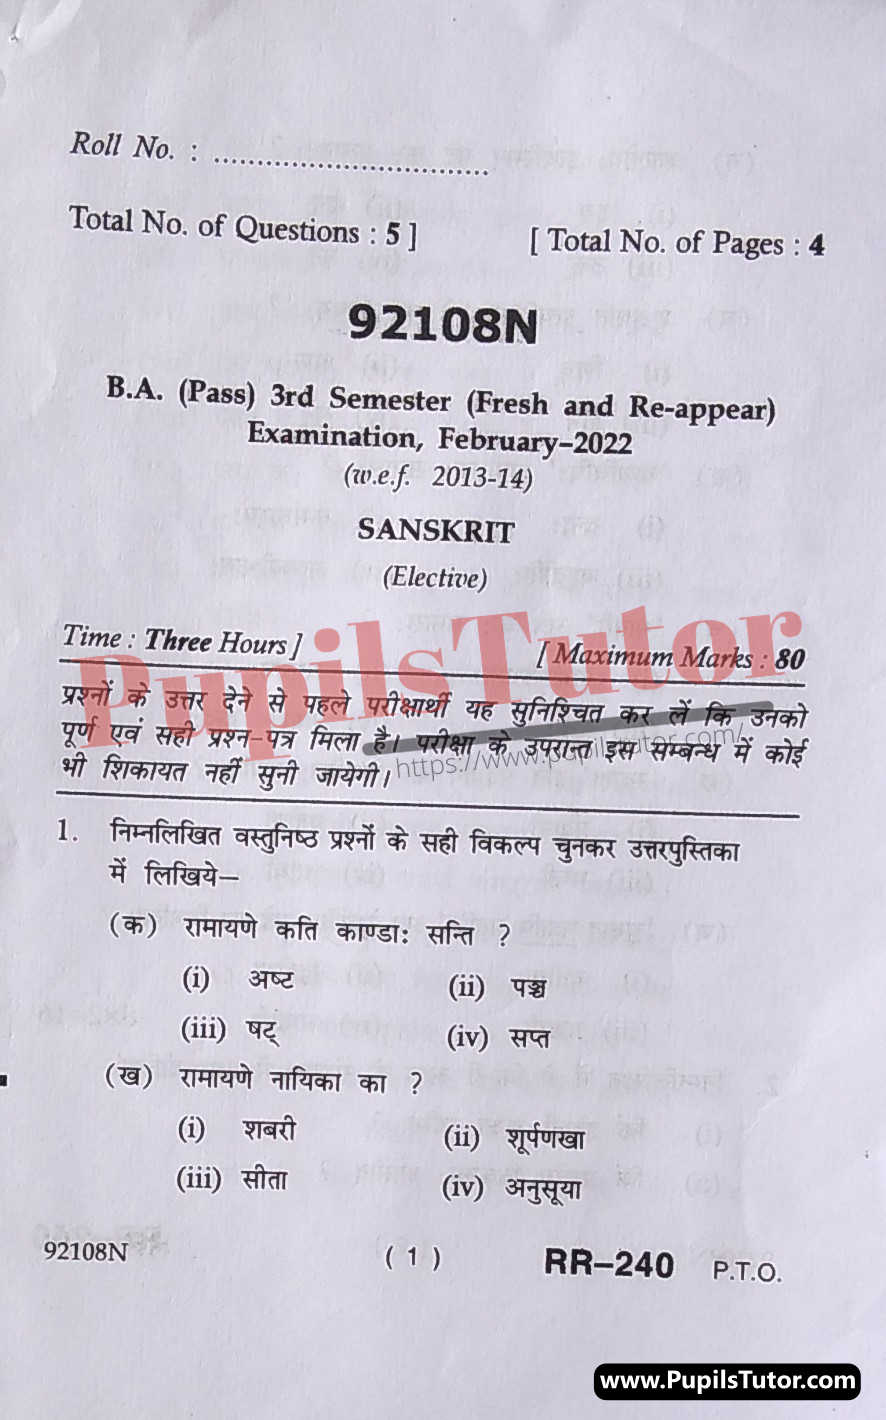 MDU (Maharshi Dayanand University, Rohtak Haryana) BA Pass Course Third Semester Previous Year Sanskrit Question Paper For February, 2022 Exam (Question Paper Page 1) - pupilstutor.com